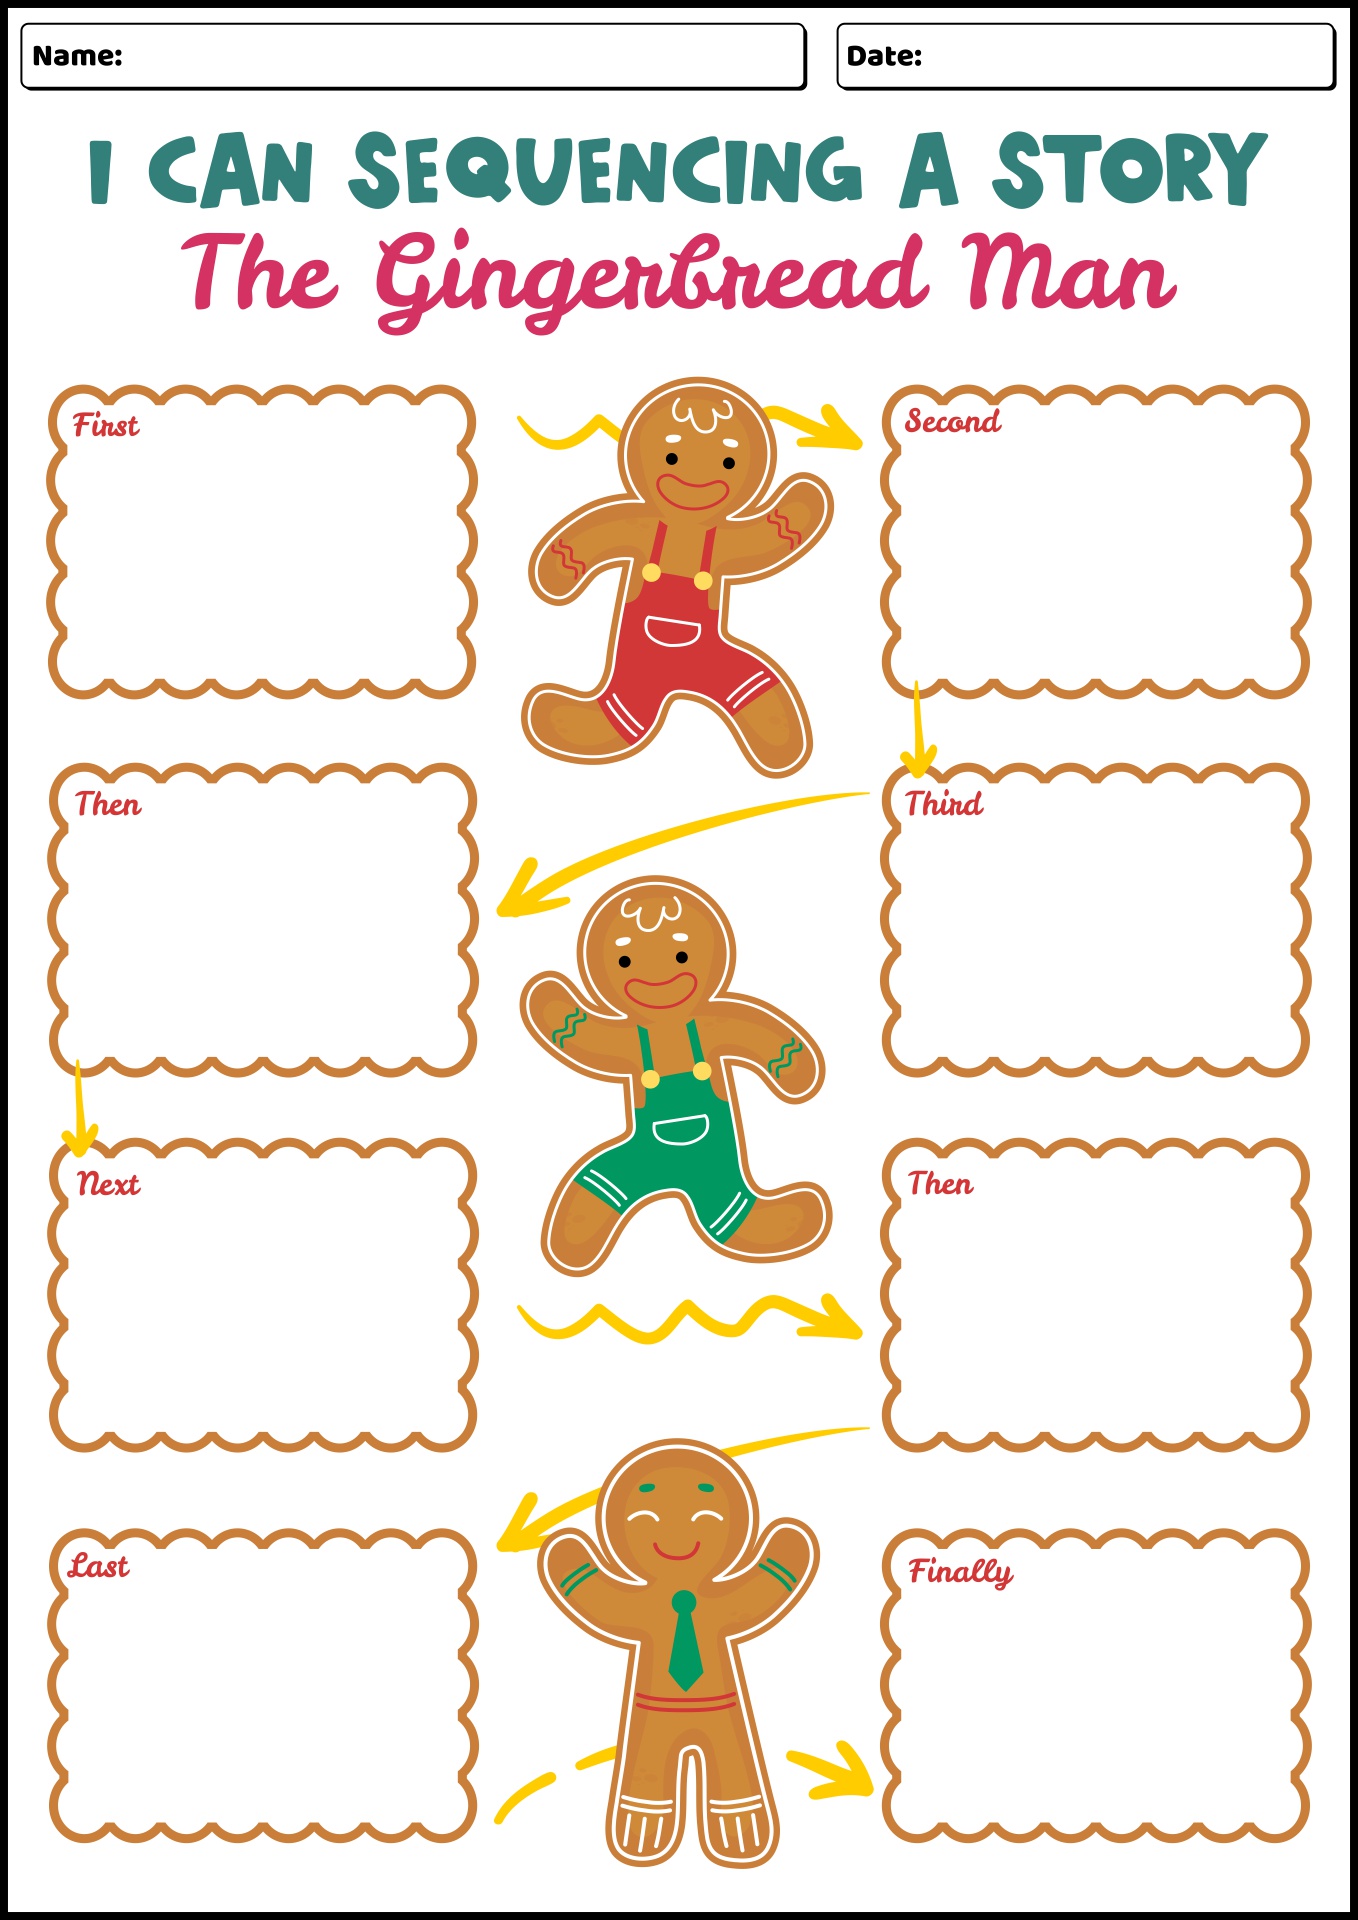 17 Best Images of Sequence Of Events Writing Worksheet - Gingerbread